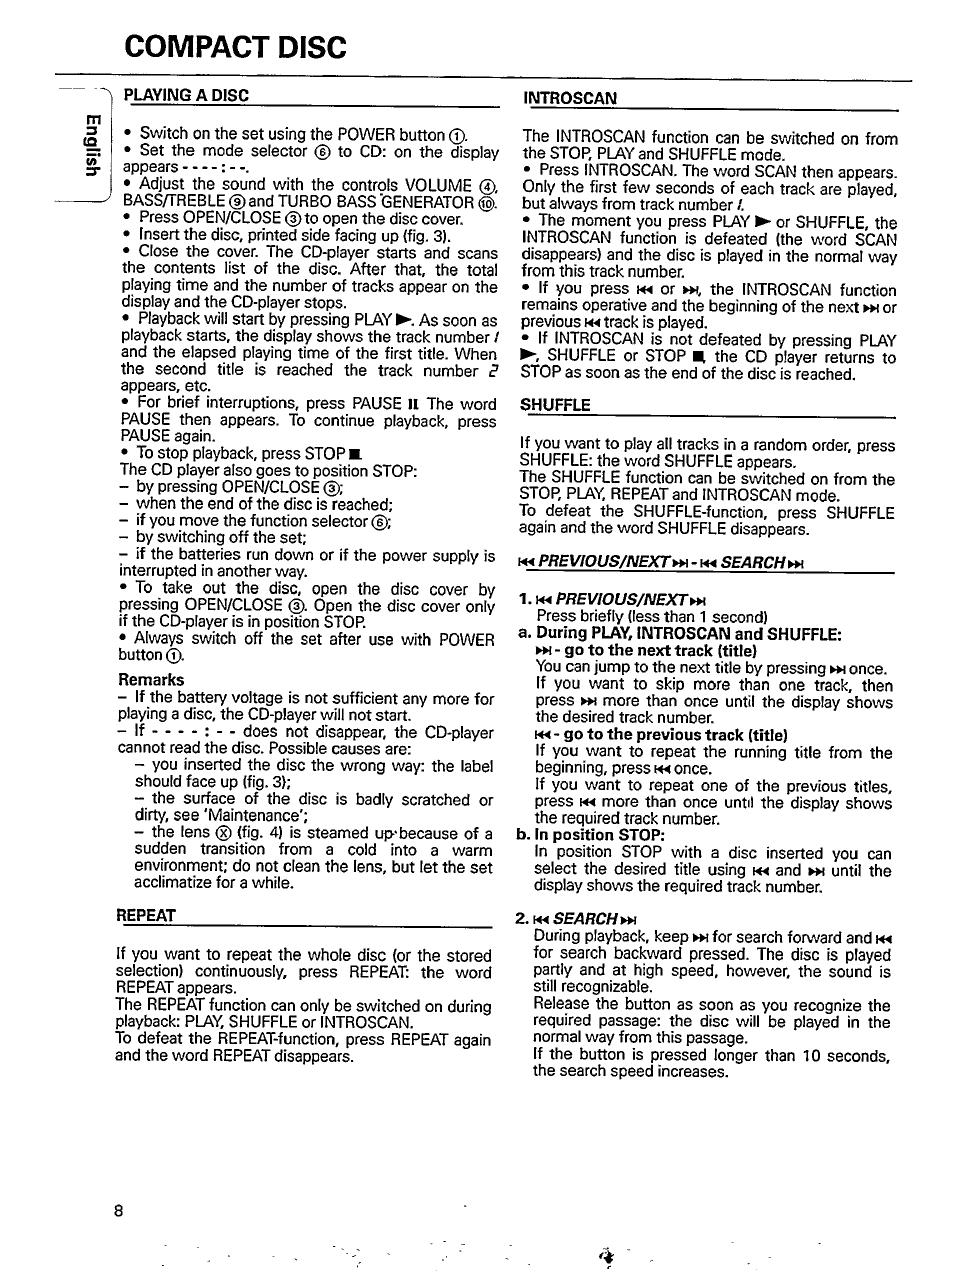 Compact disc, Repeat | Philips AZ 8210 User Manual | Page 8 / 14